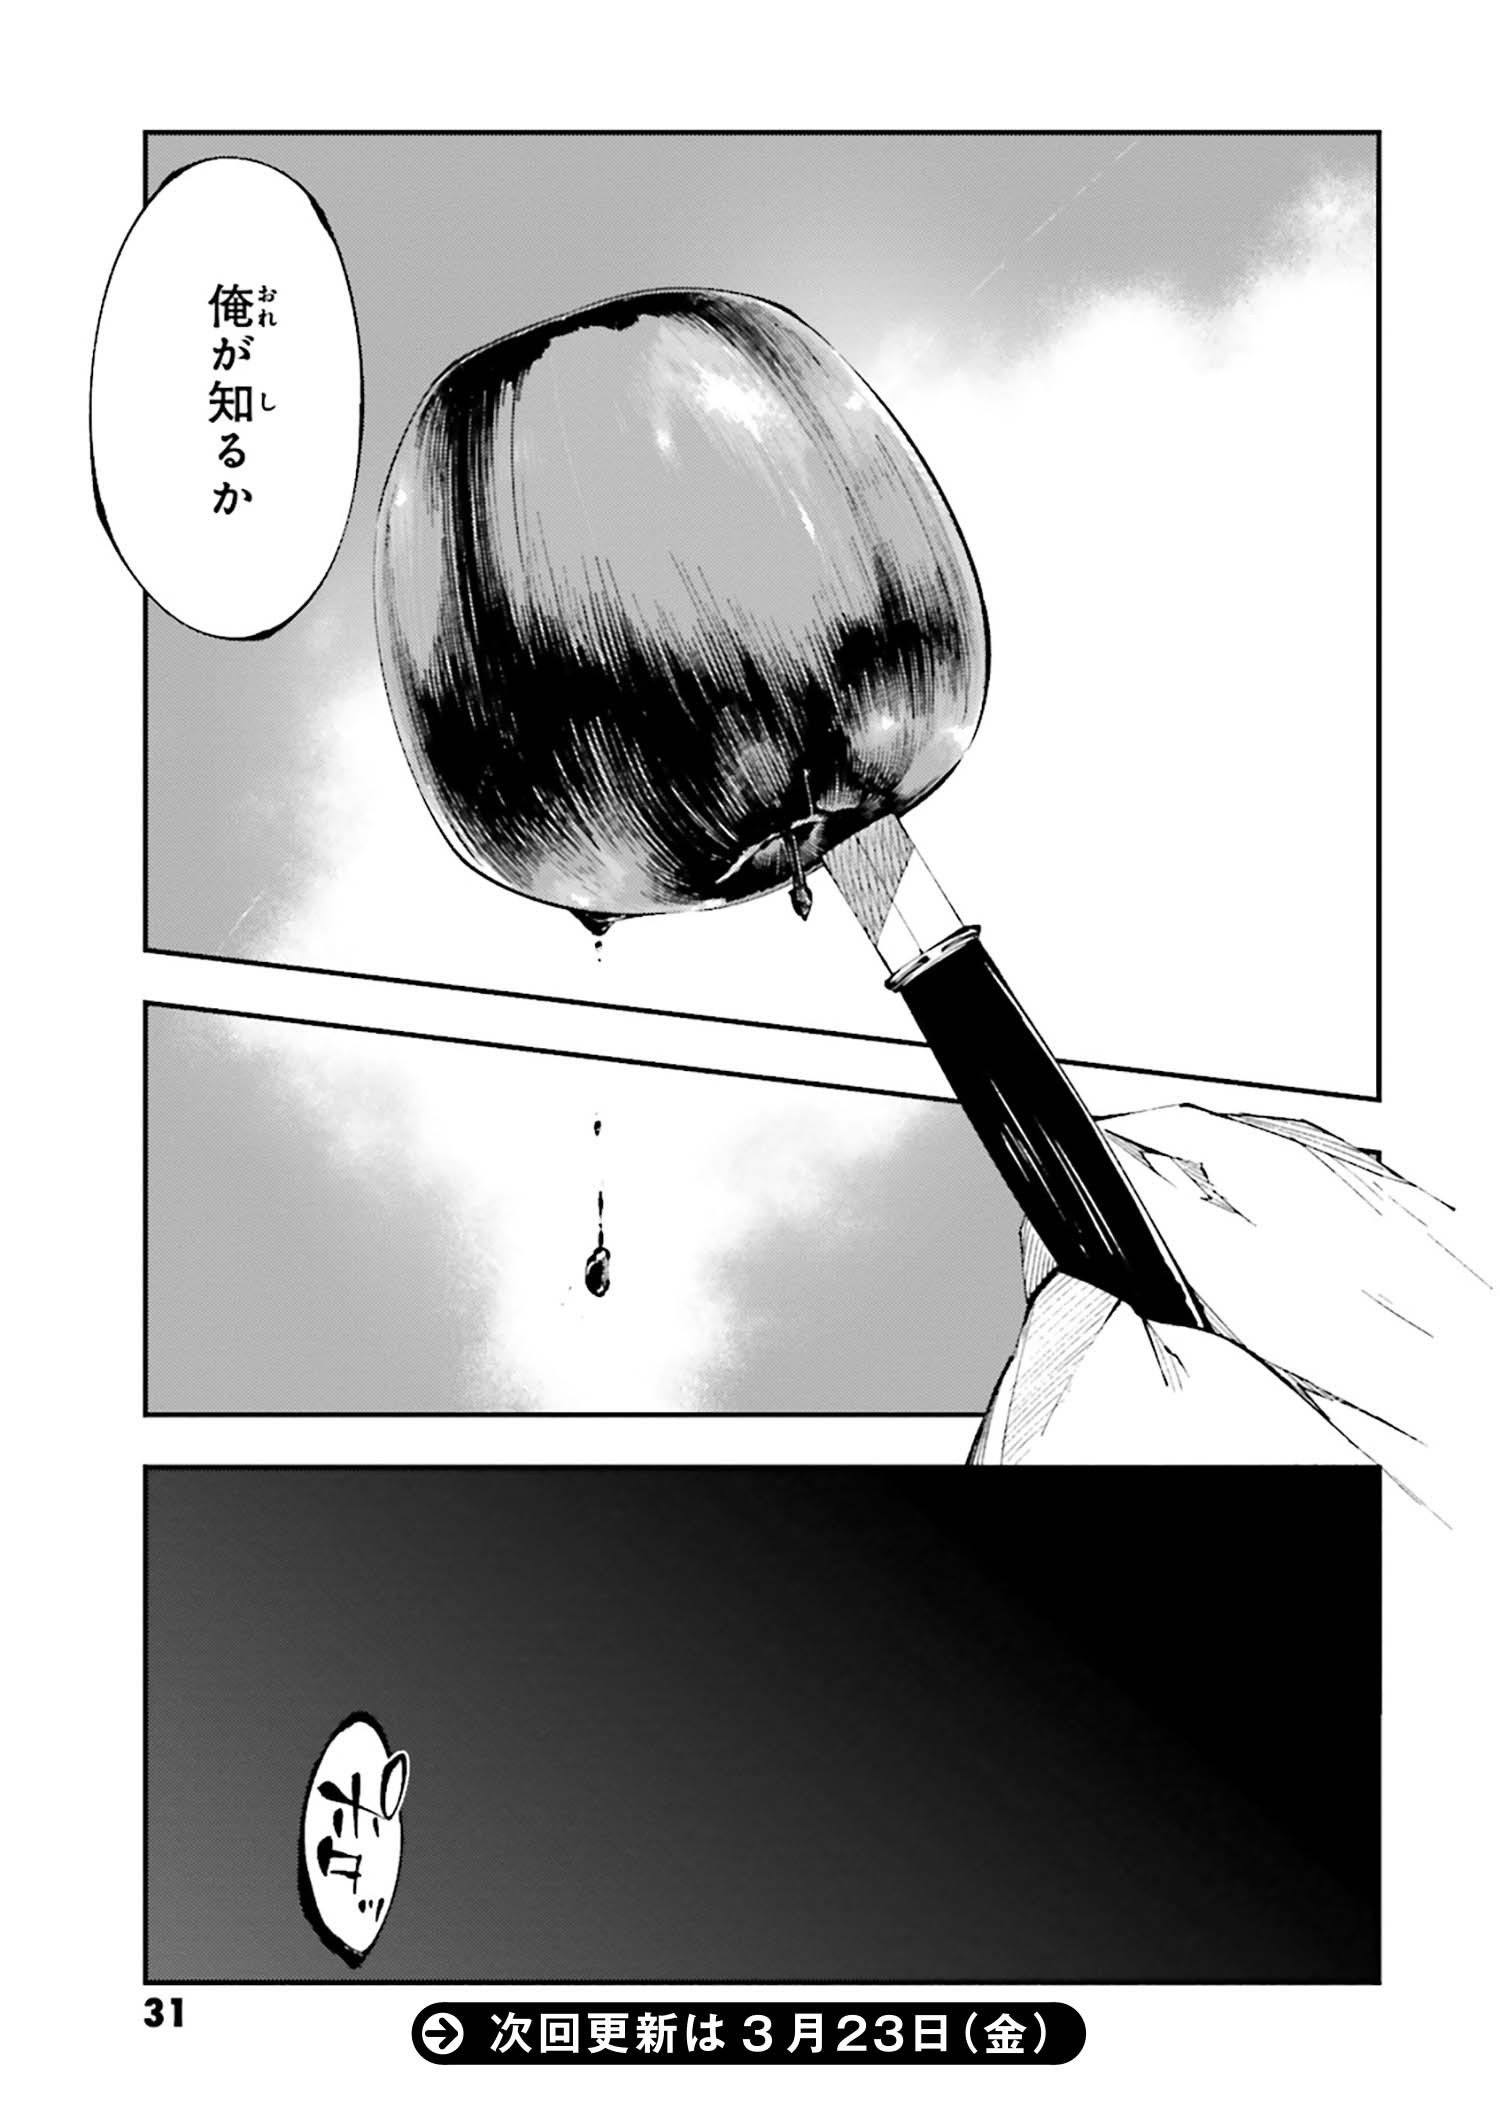 Bungou Stray Dogs: Dead Apple - Chapter 1-1 - Page 30